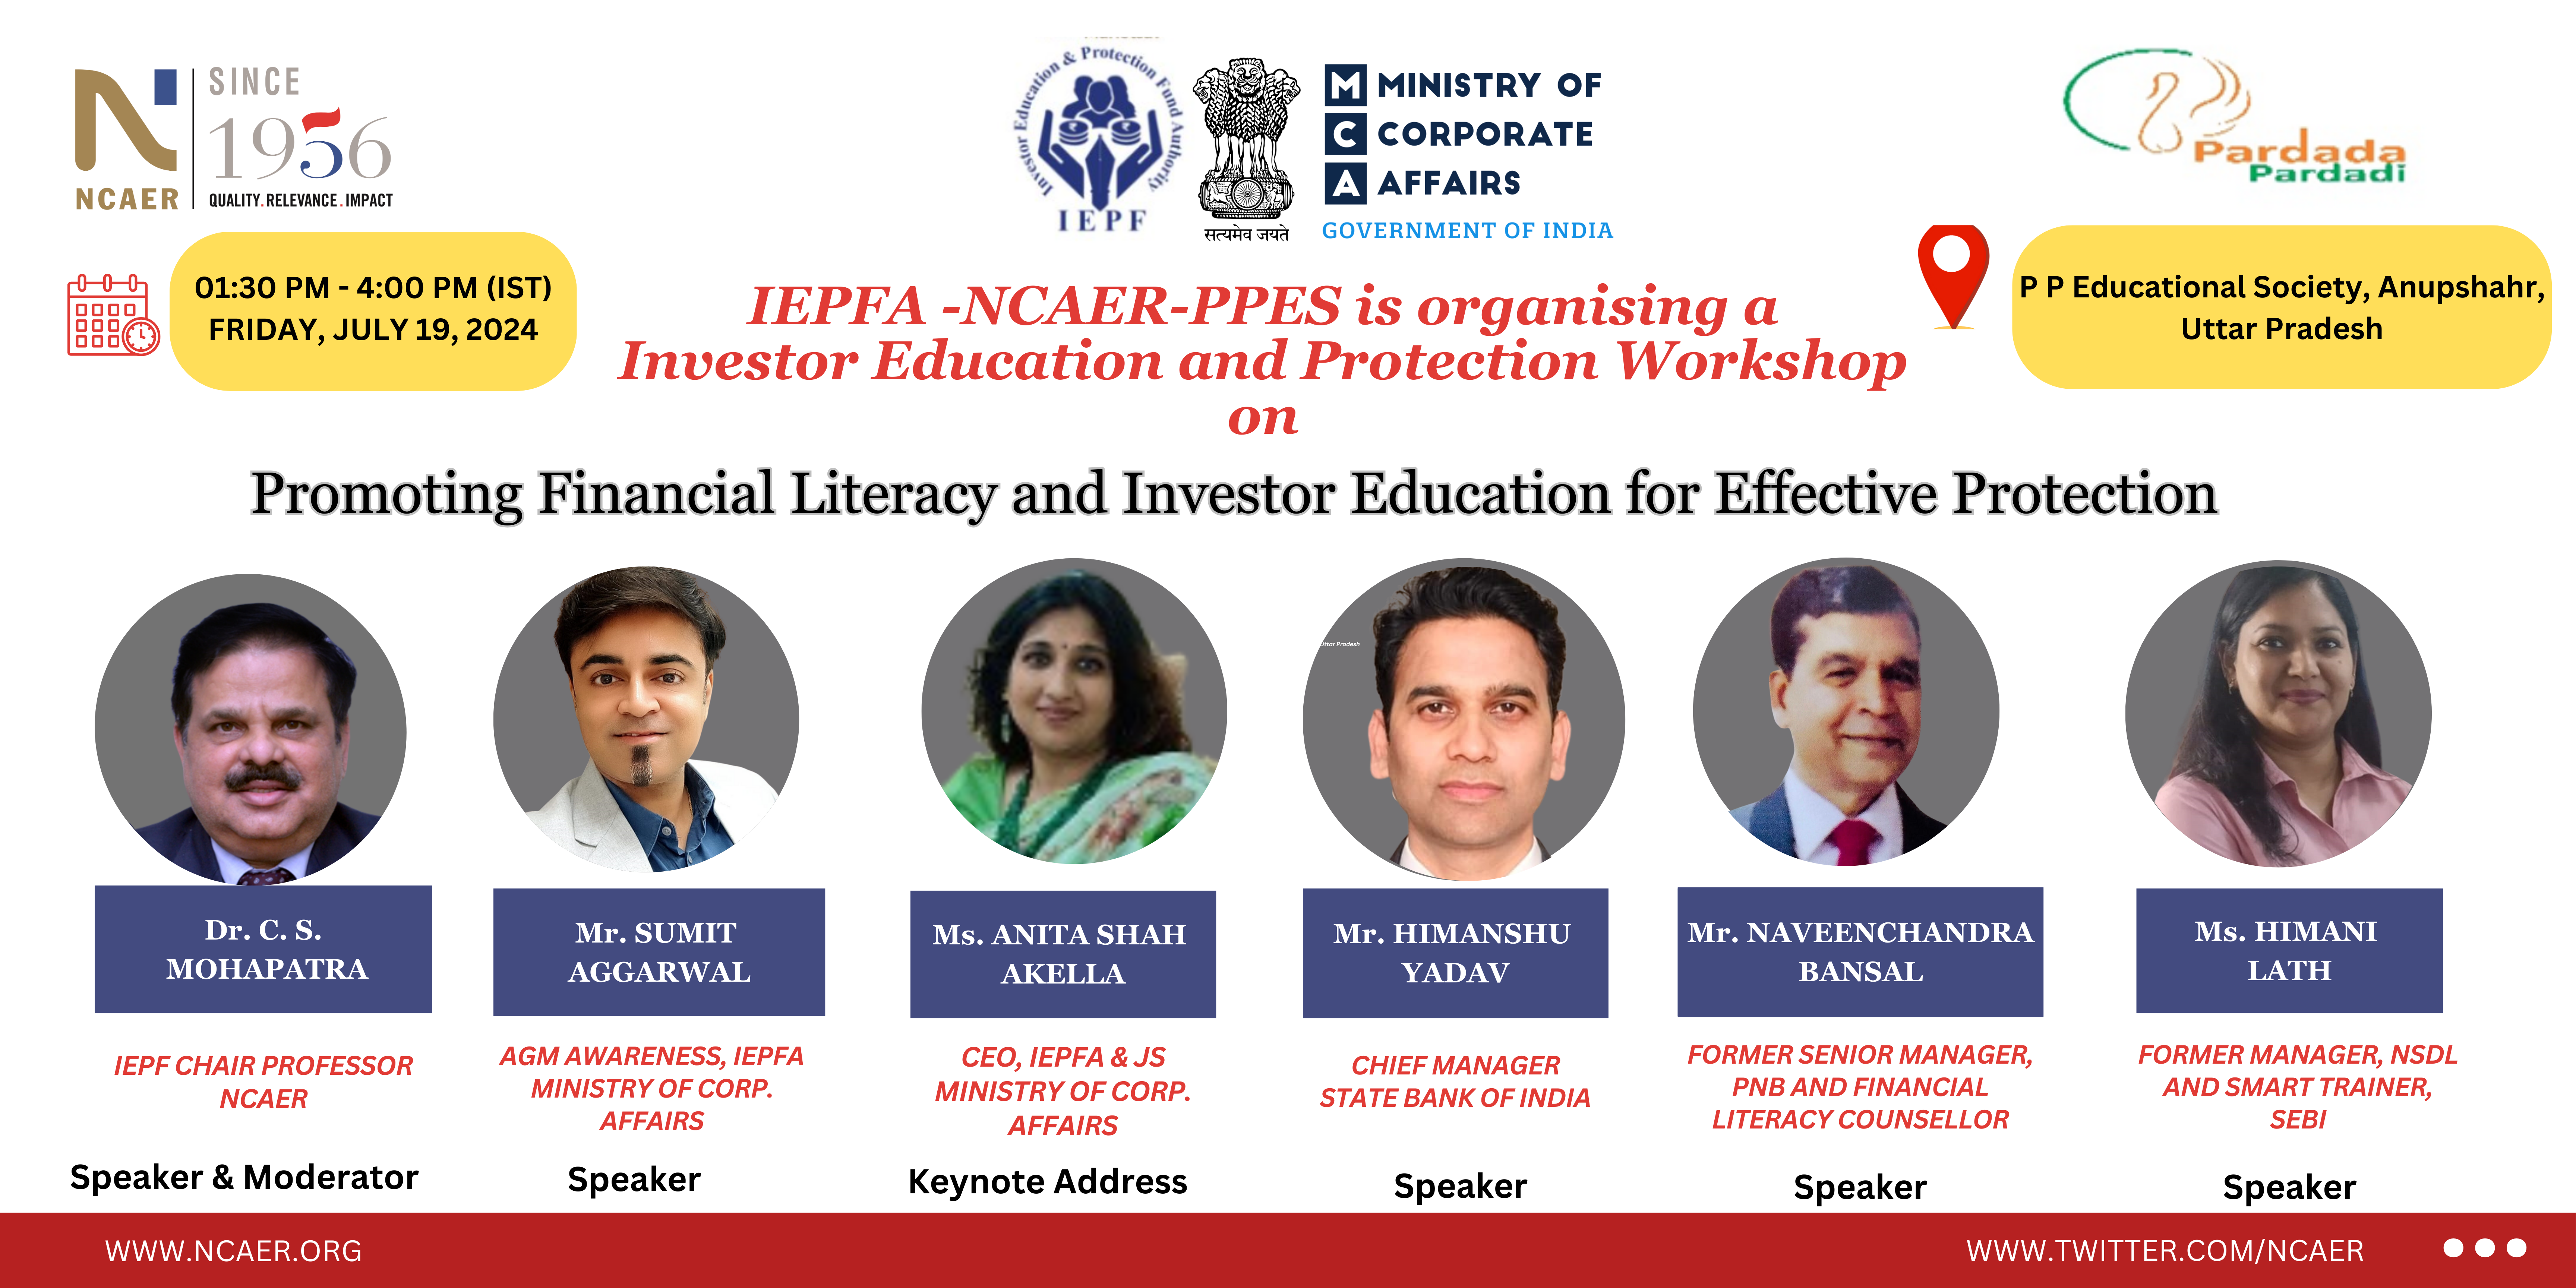 Promoting Financial Literacy and Investor Education for Effective Protection